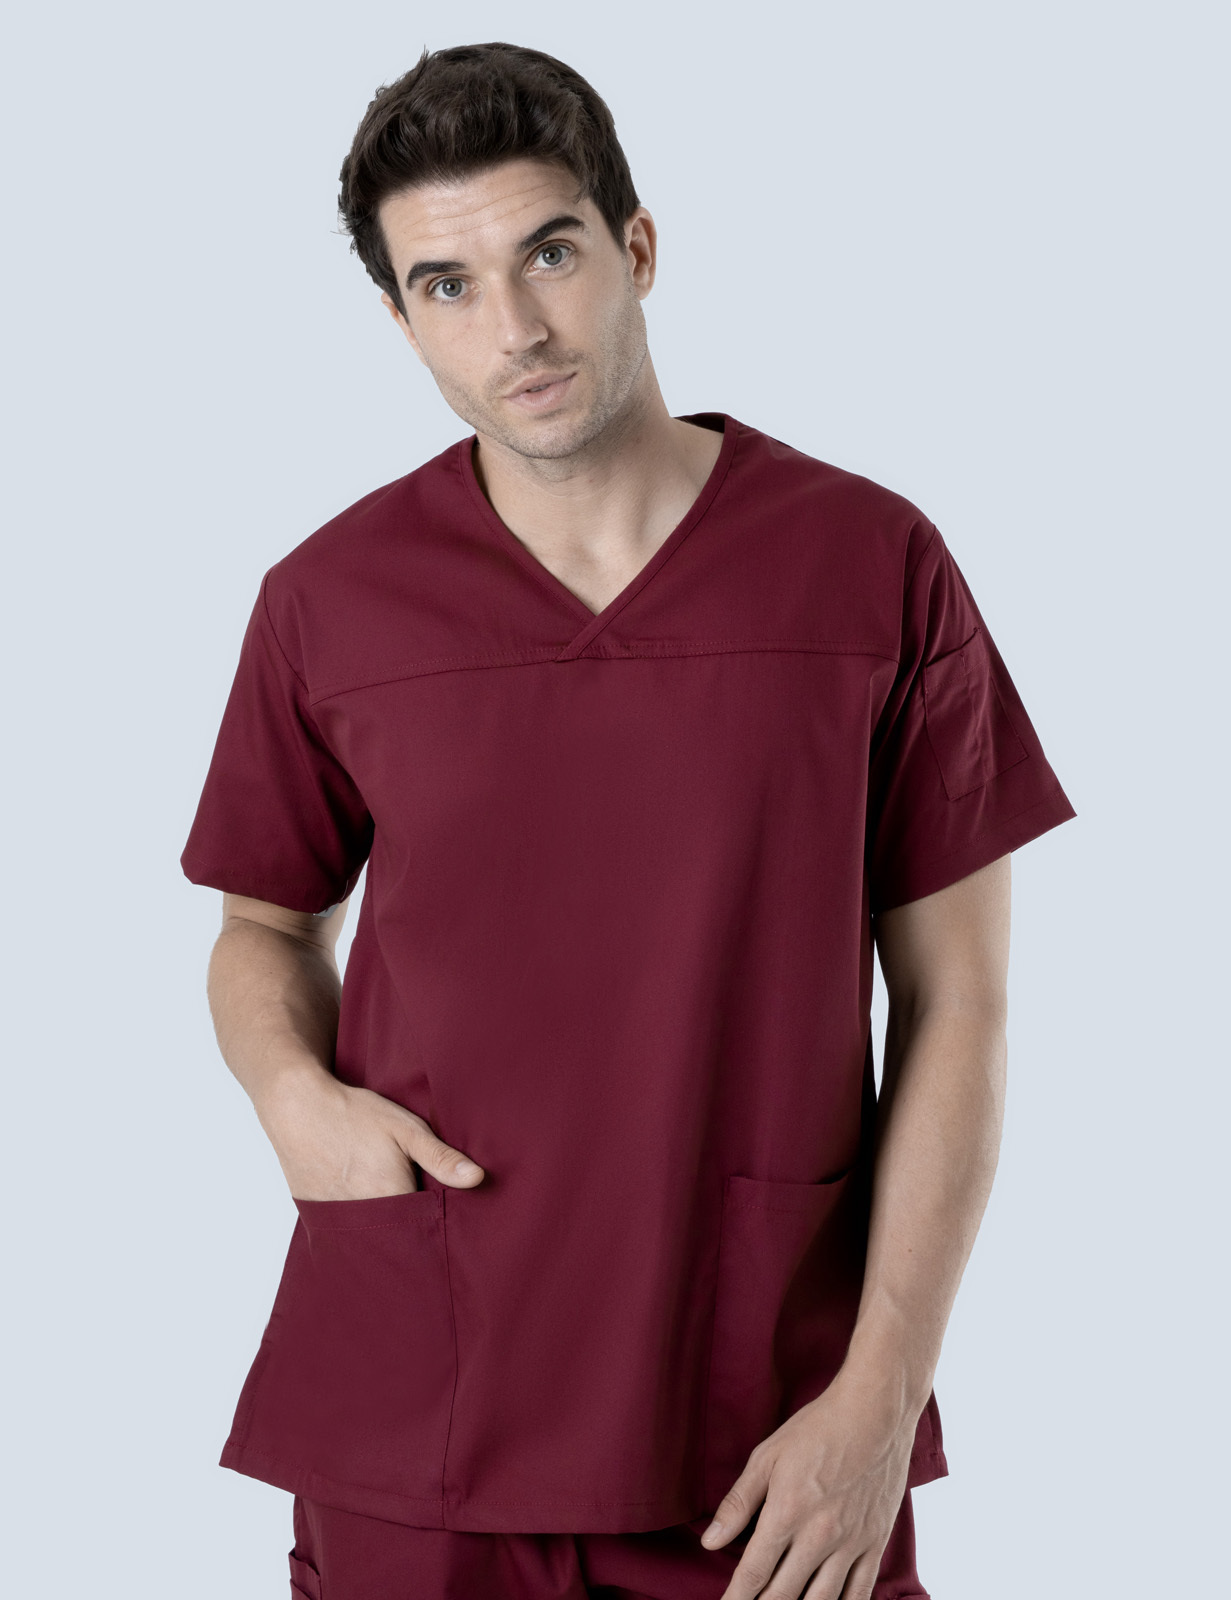 Men's Fit Solid Scrub Top - Burgundy - X Large